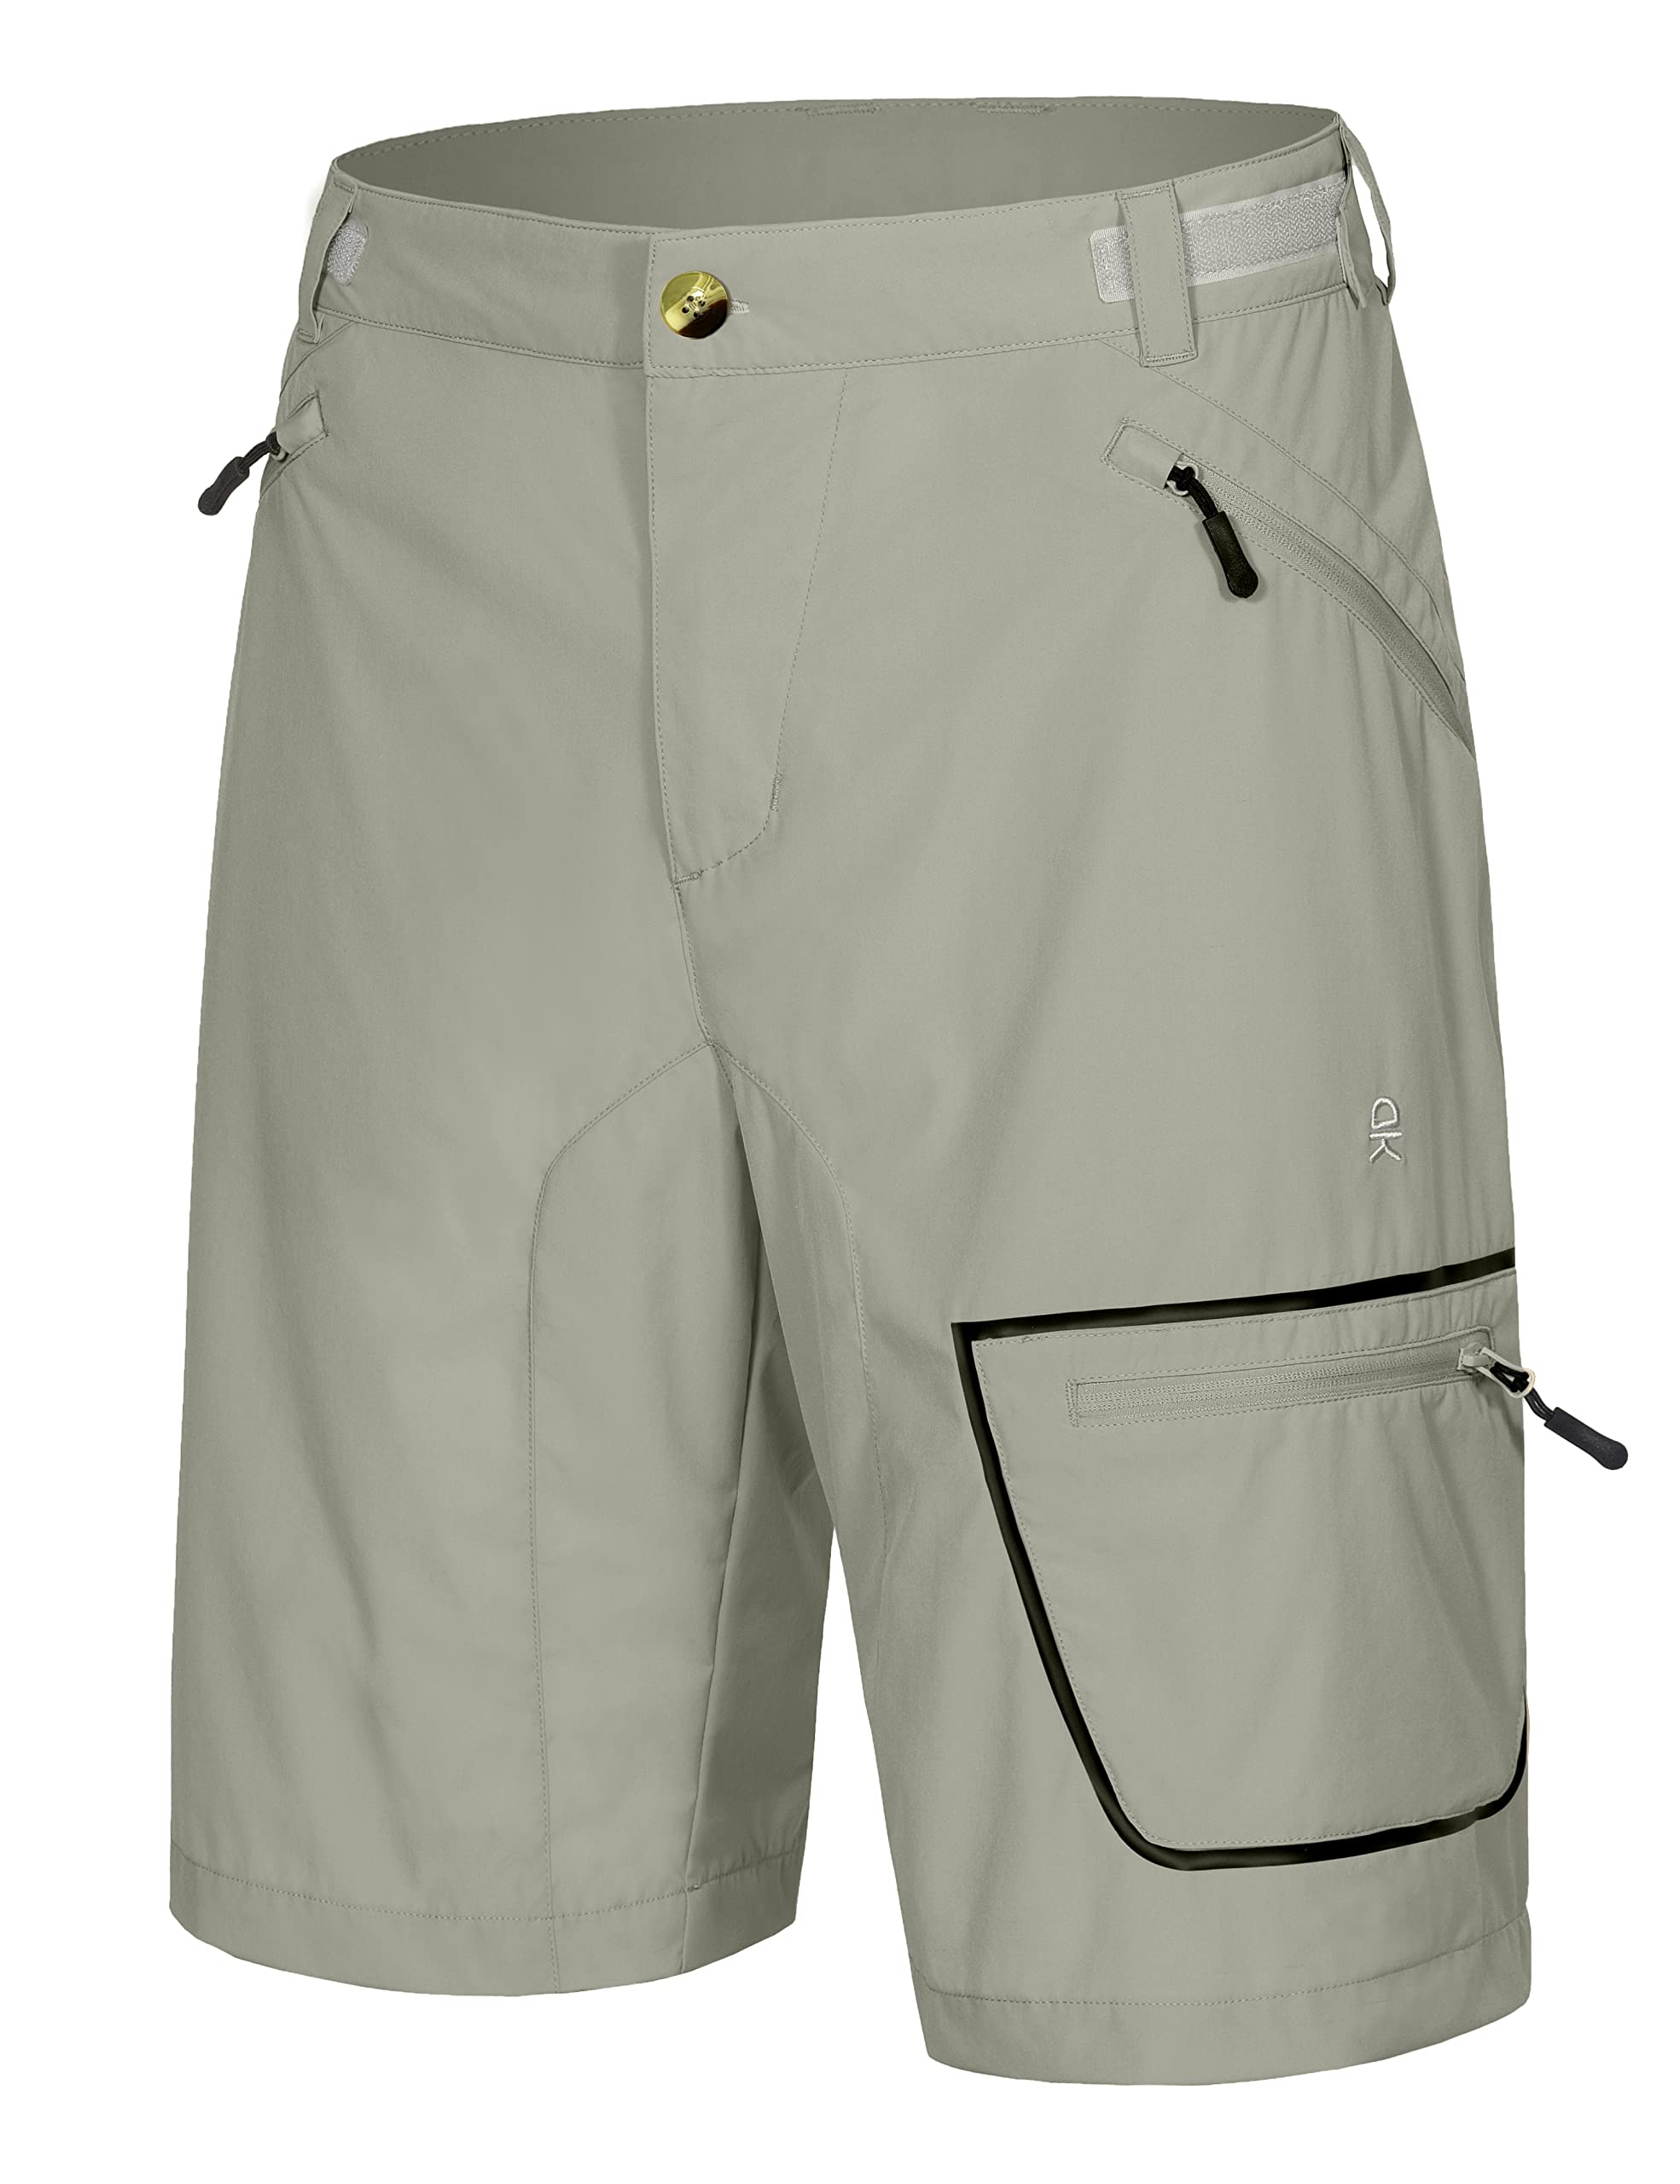 Little Donkey Andy Men's Lightweight Quick Dry Hiking Shorts Breathable  Outdoor Cargo Shorts for Fishing Travel Casual 04. Light Khaki Large